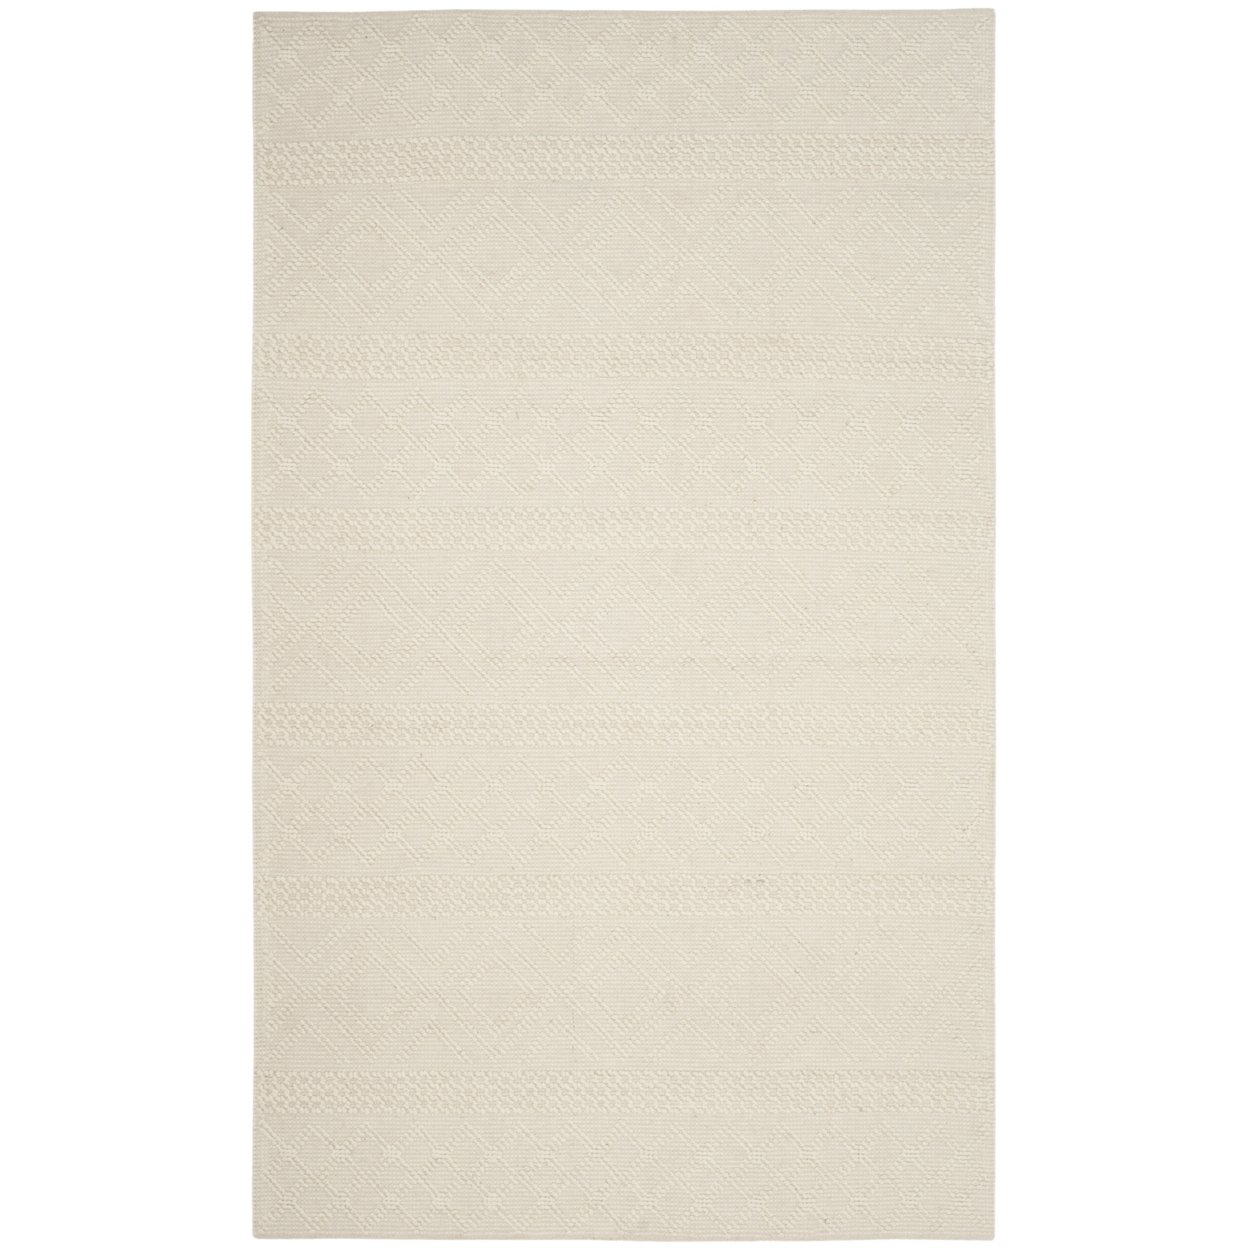 SAFAVIEH Vermont Collection VRM211A Handwoven Ivory Rug - 8' Square